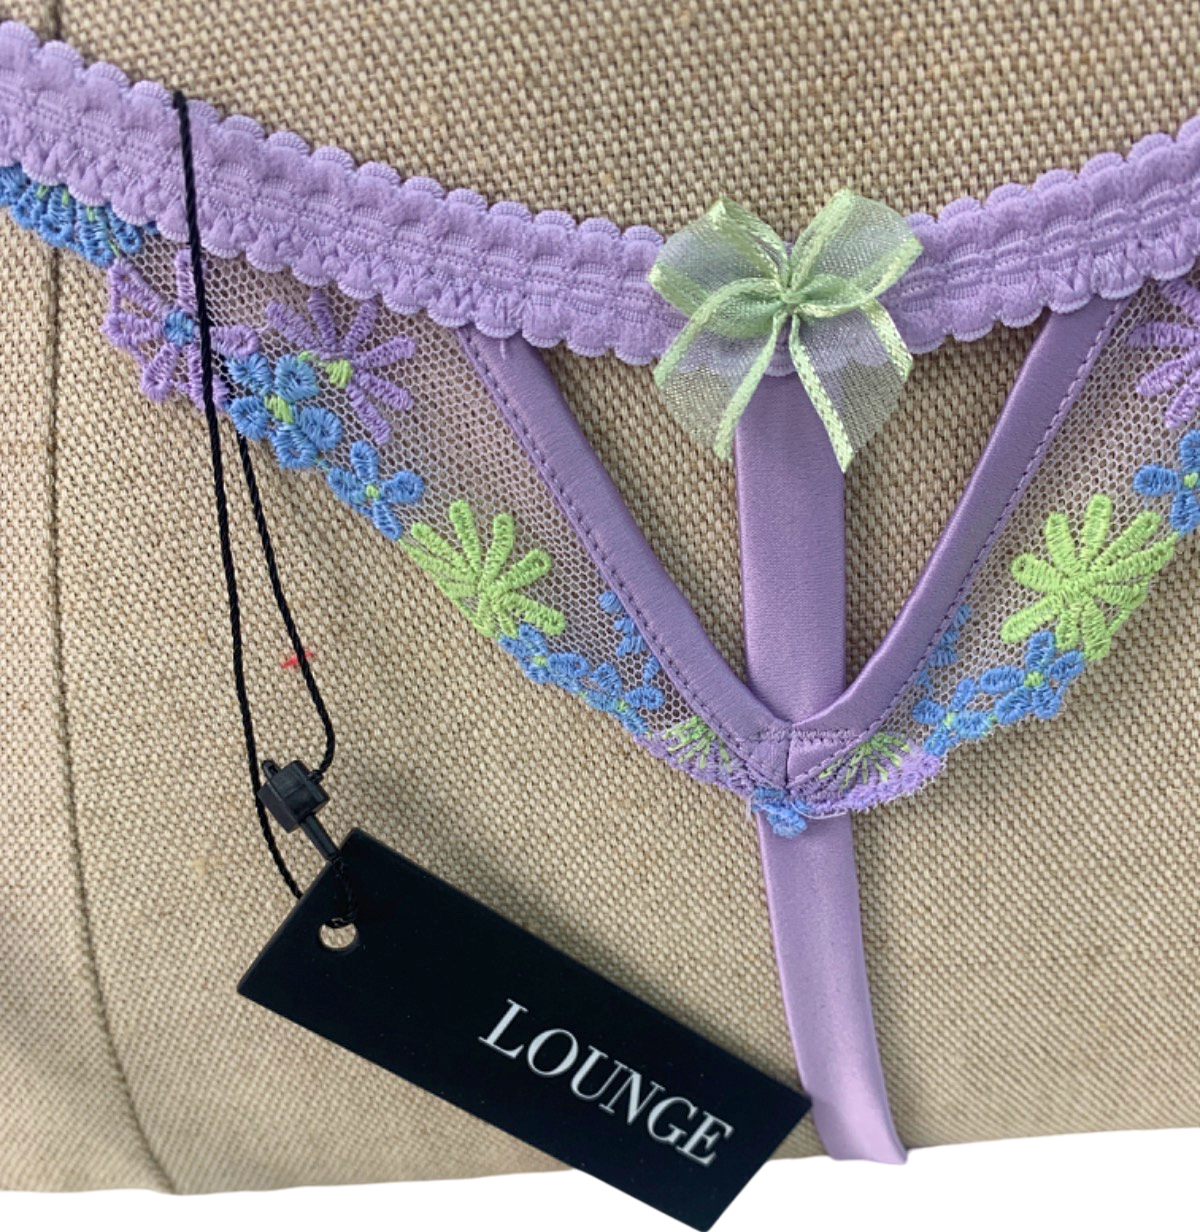 Lounge Lilac Amelia Embroidered Body XS